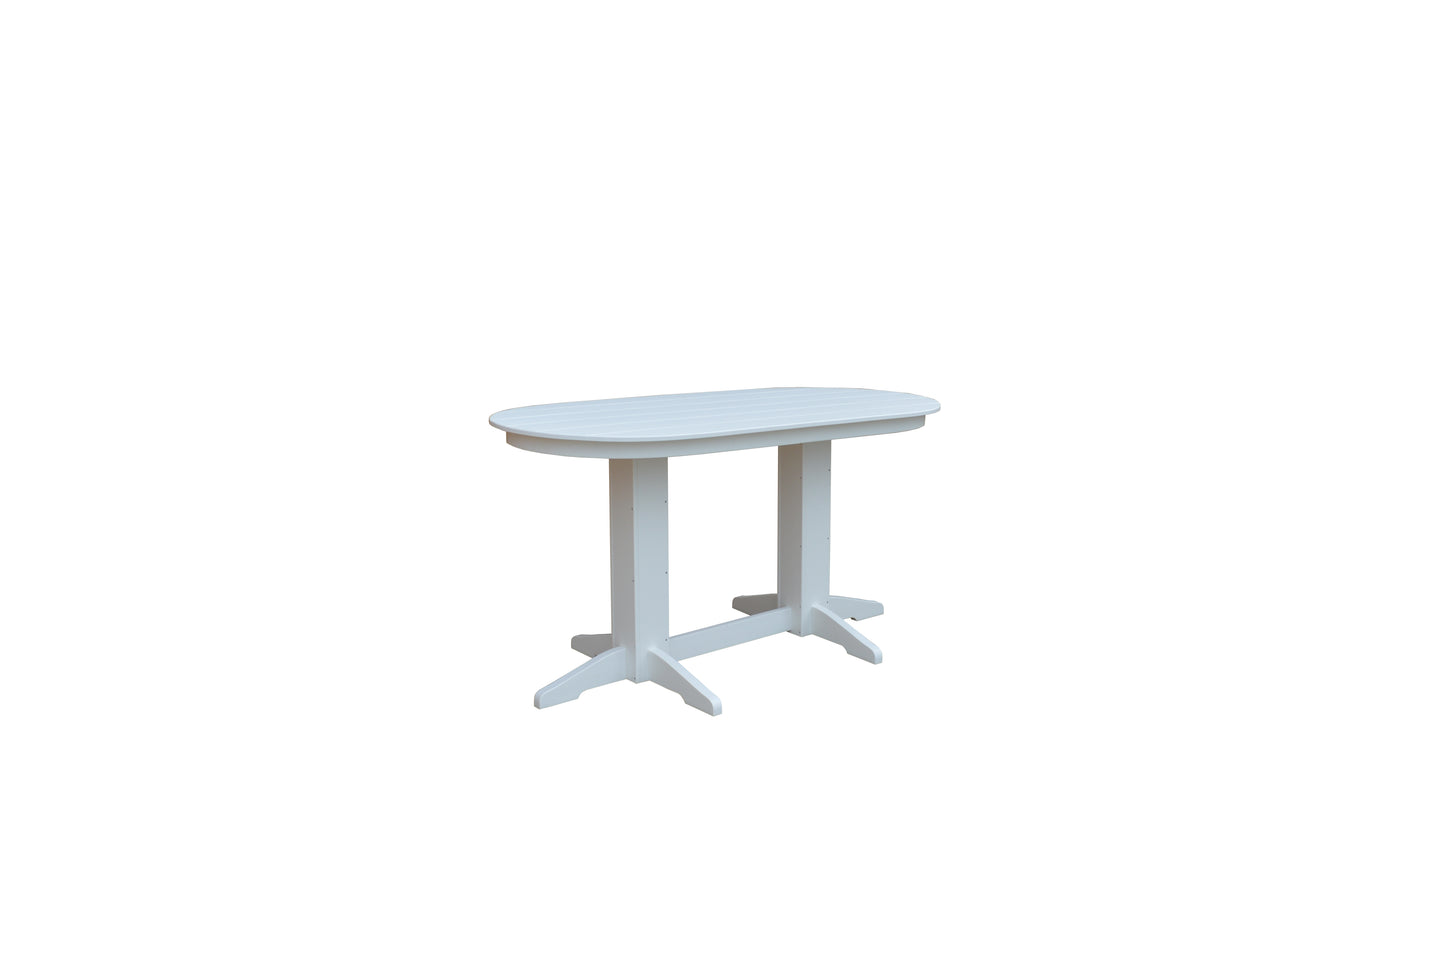 A&L Furniture Co. Recycled Plastic 6' Oval Table (Counter Height) - LEAD TIME TO SHIP 10 BUSINESS DAYS